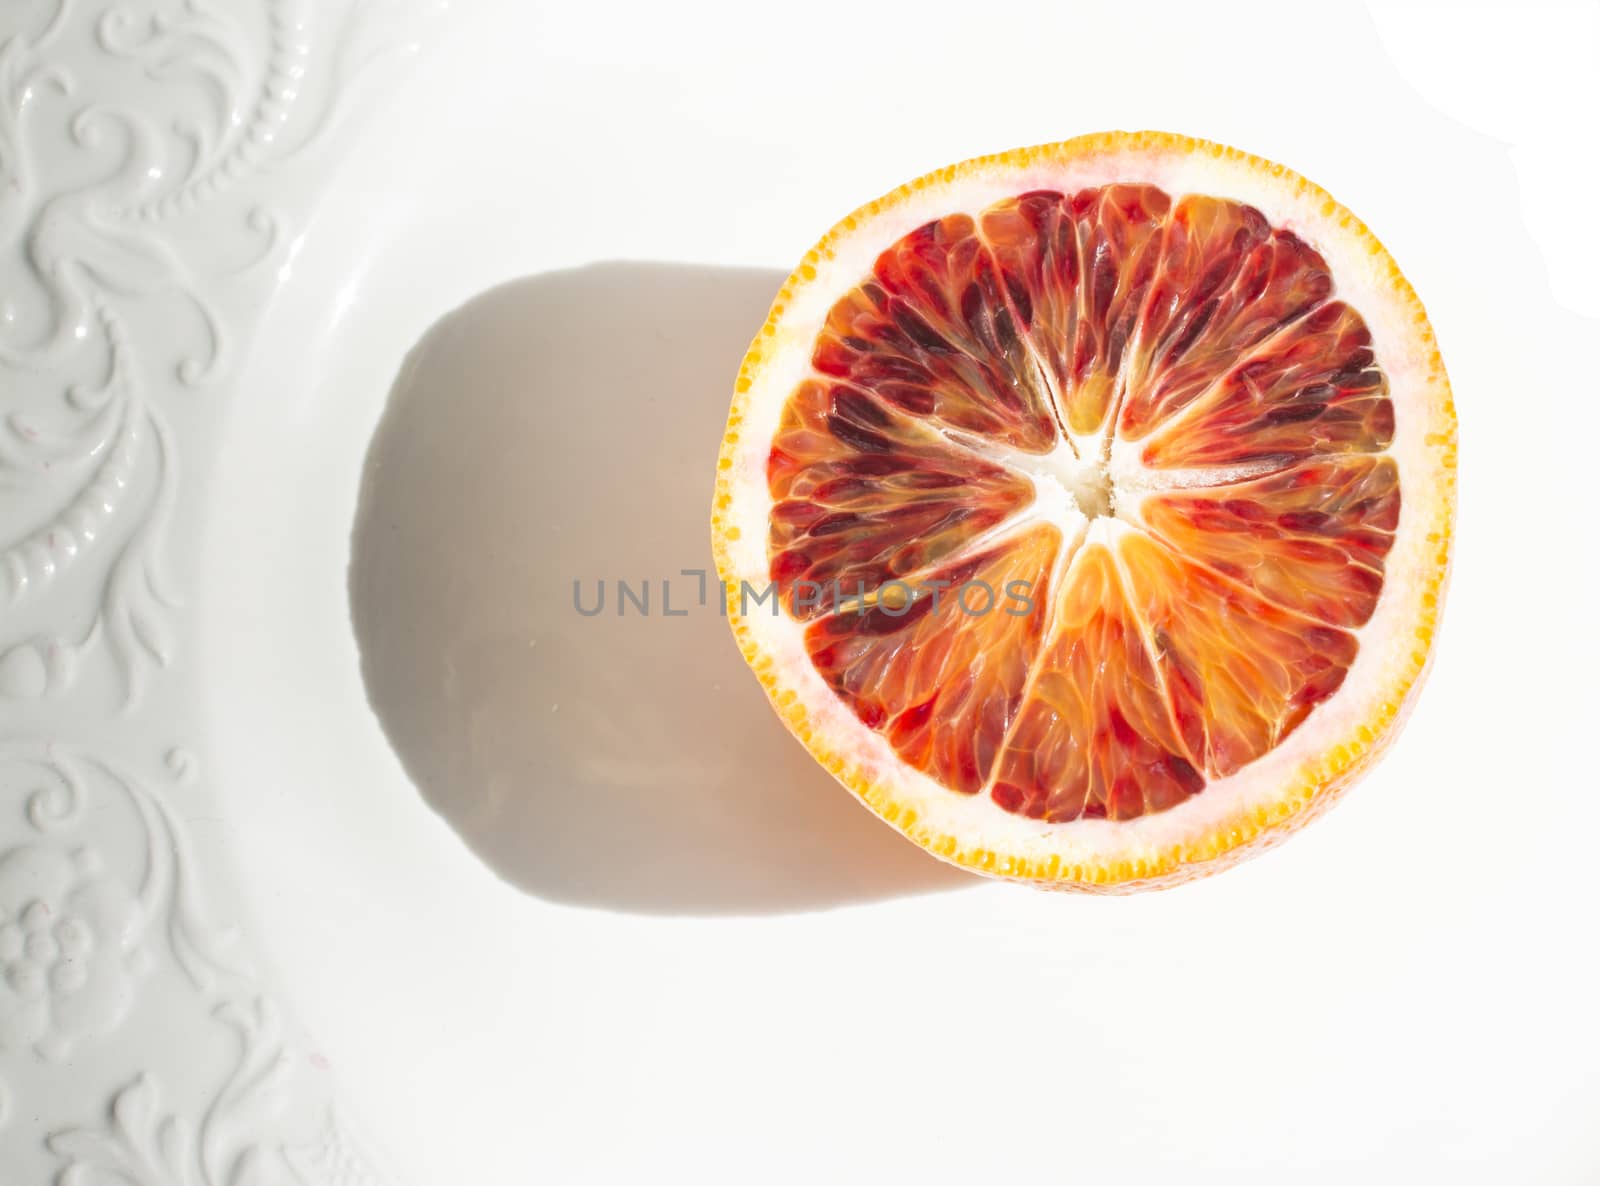 Red orange sliced with shadow on white plate with patterned edge.